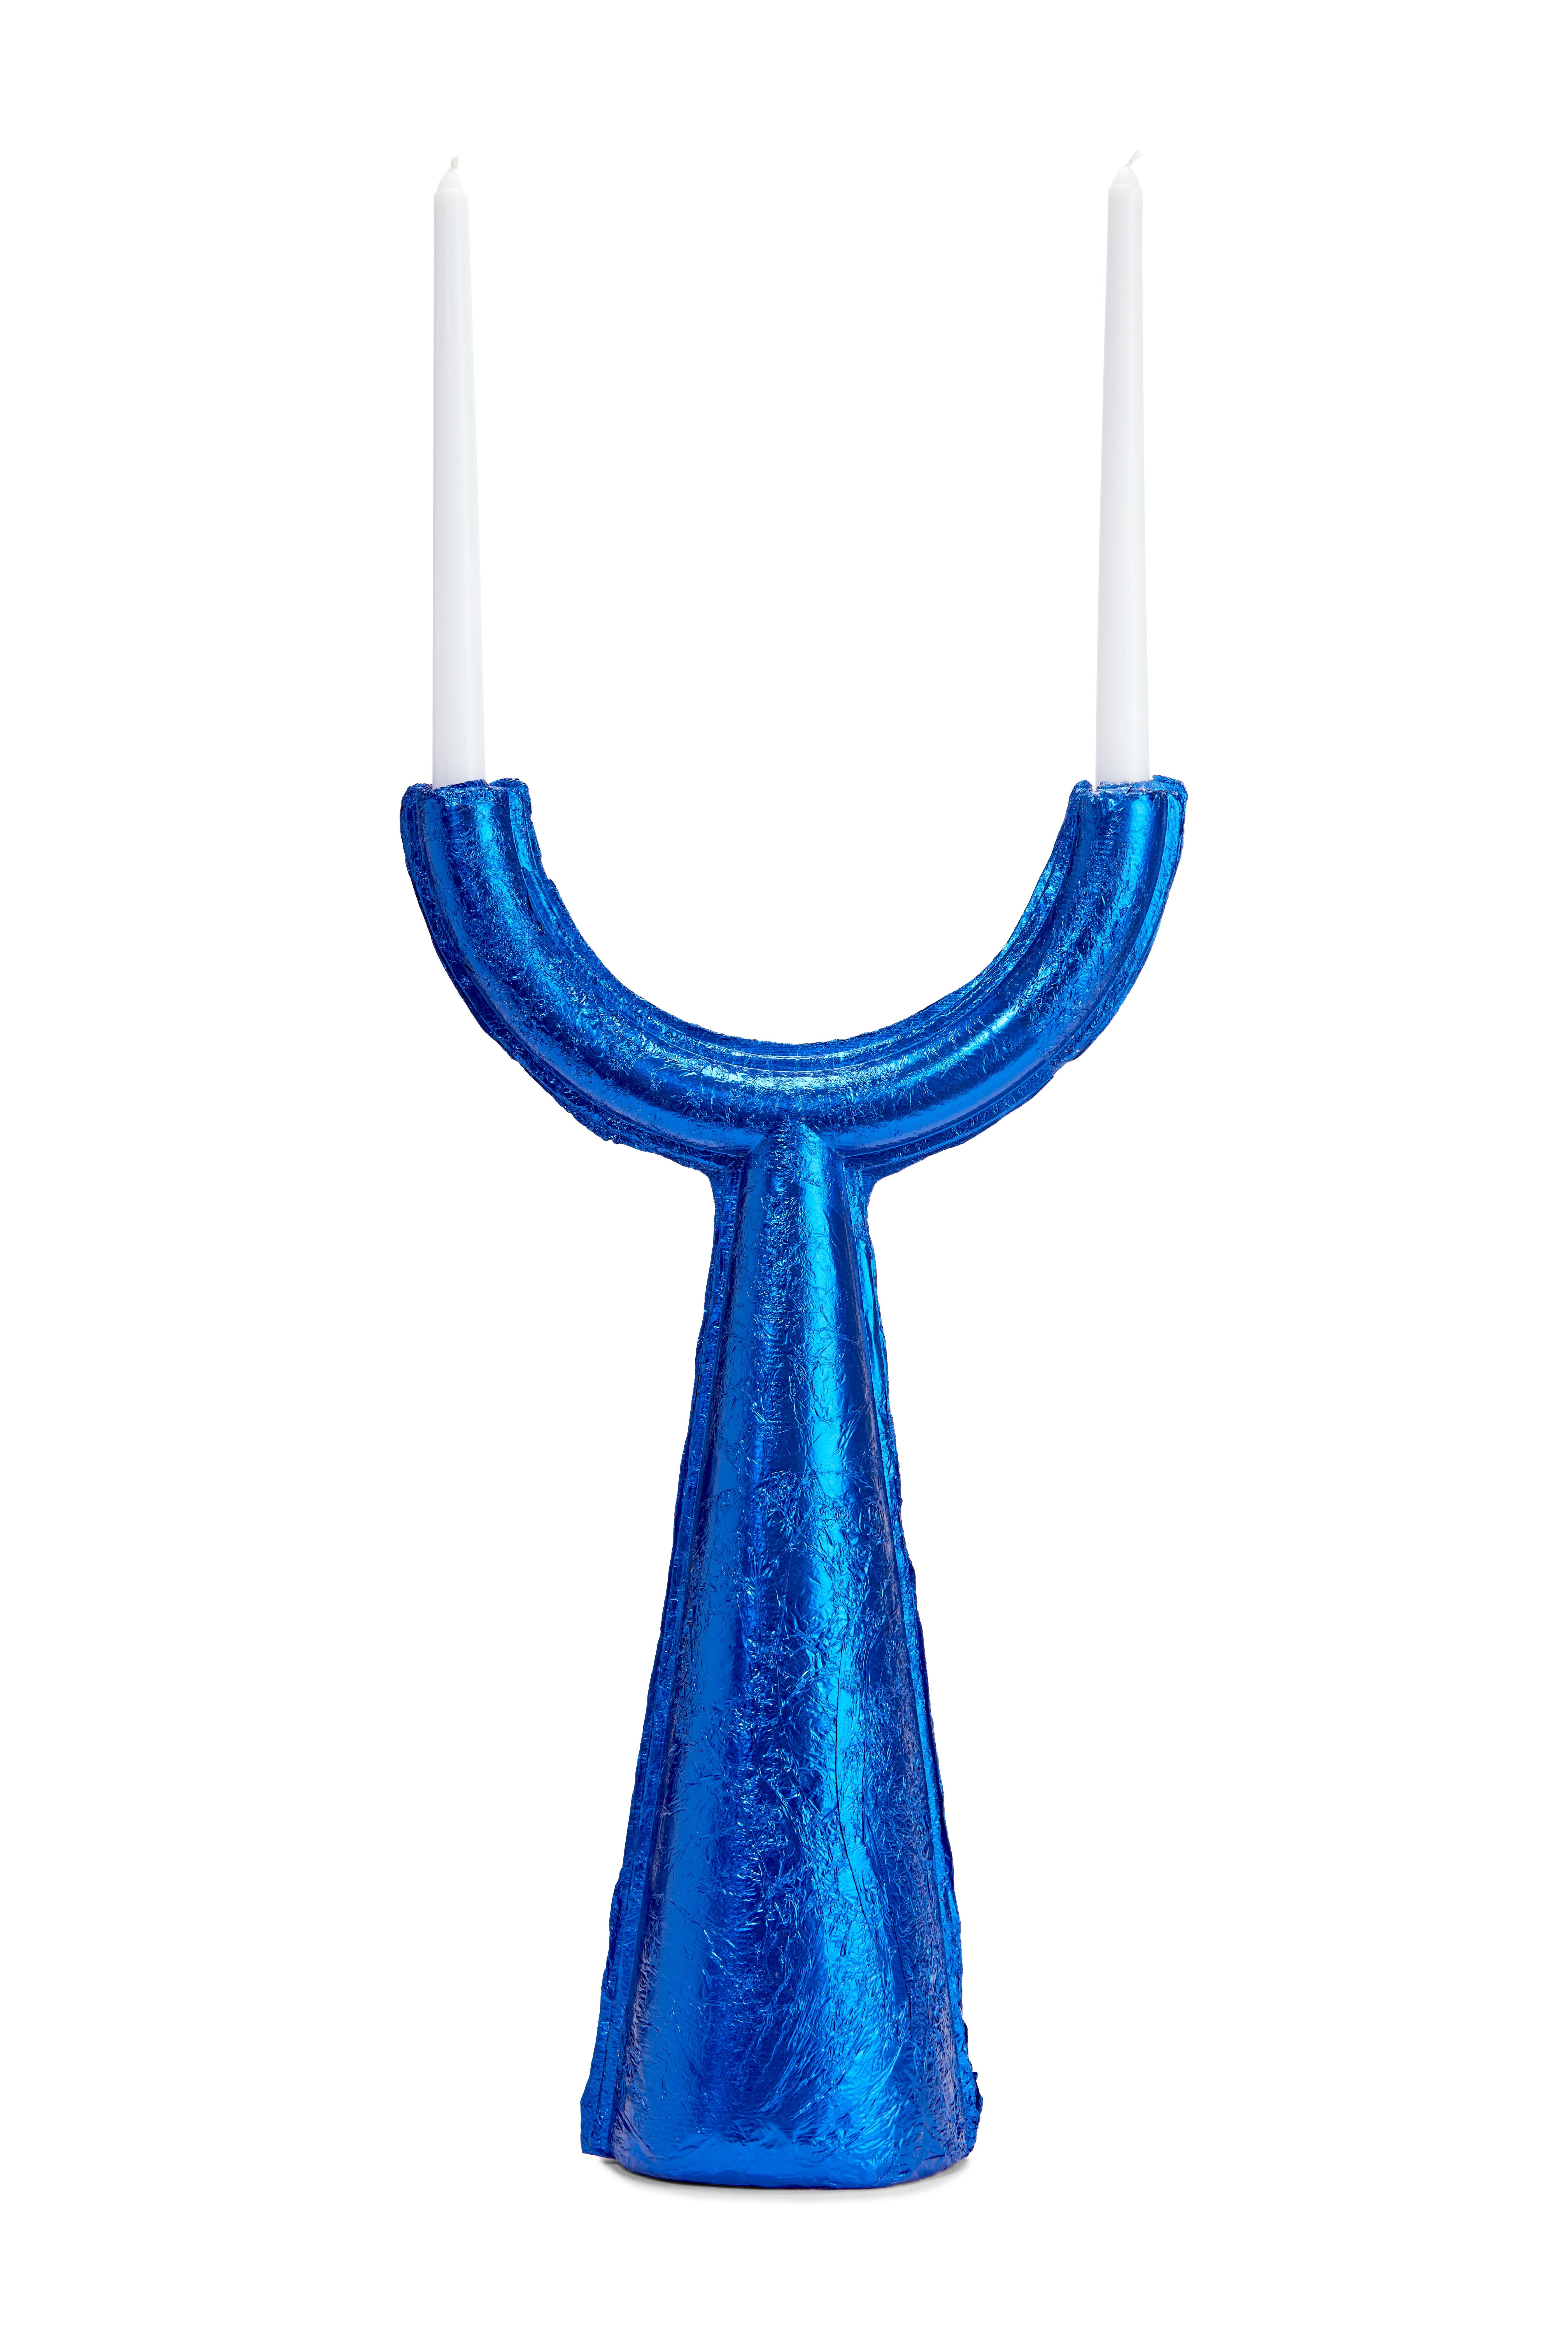 Contemporary Pressed Aluminium Chunk Candleholder in Blue by Ward Wijnant For Sale 3